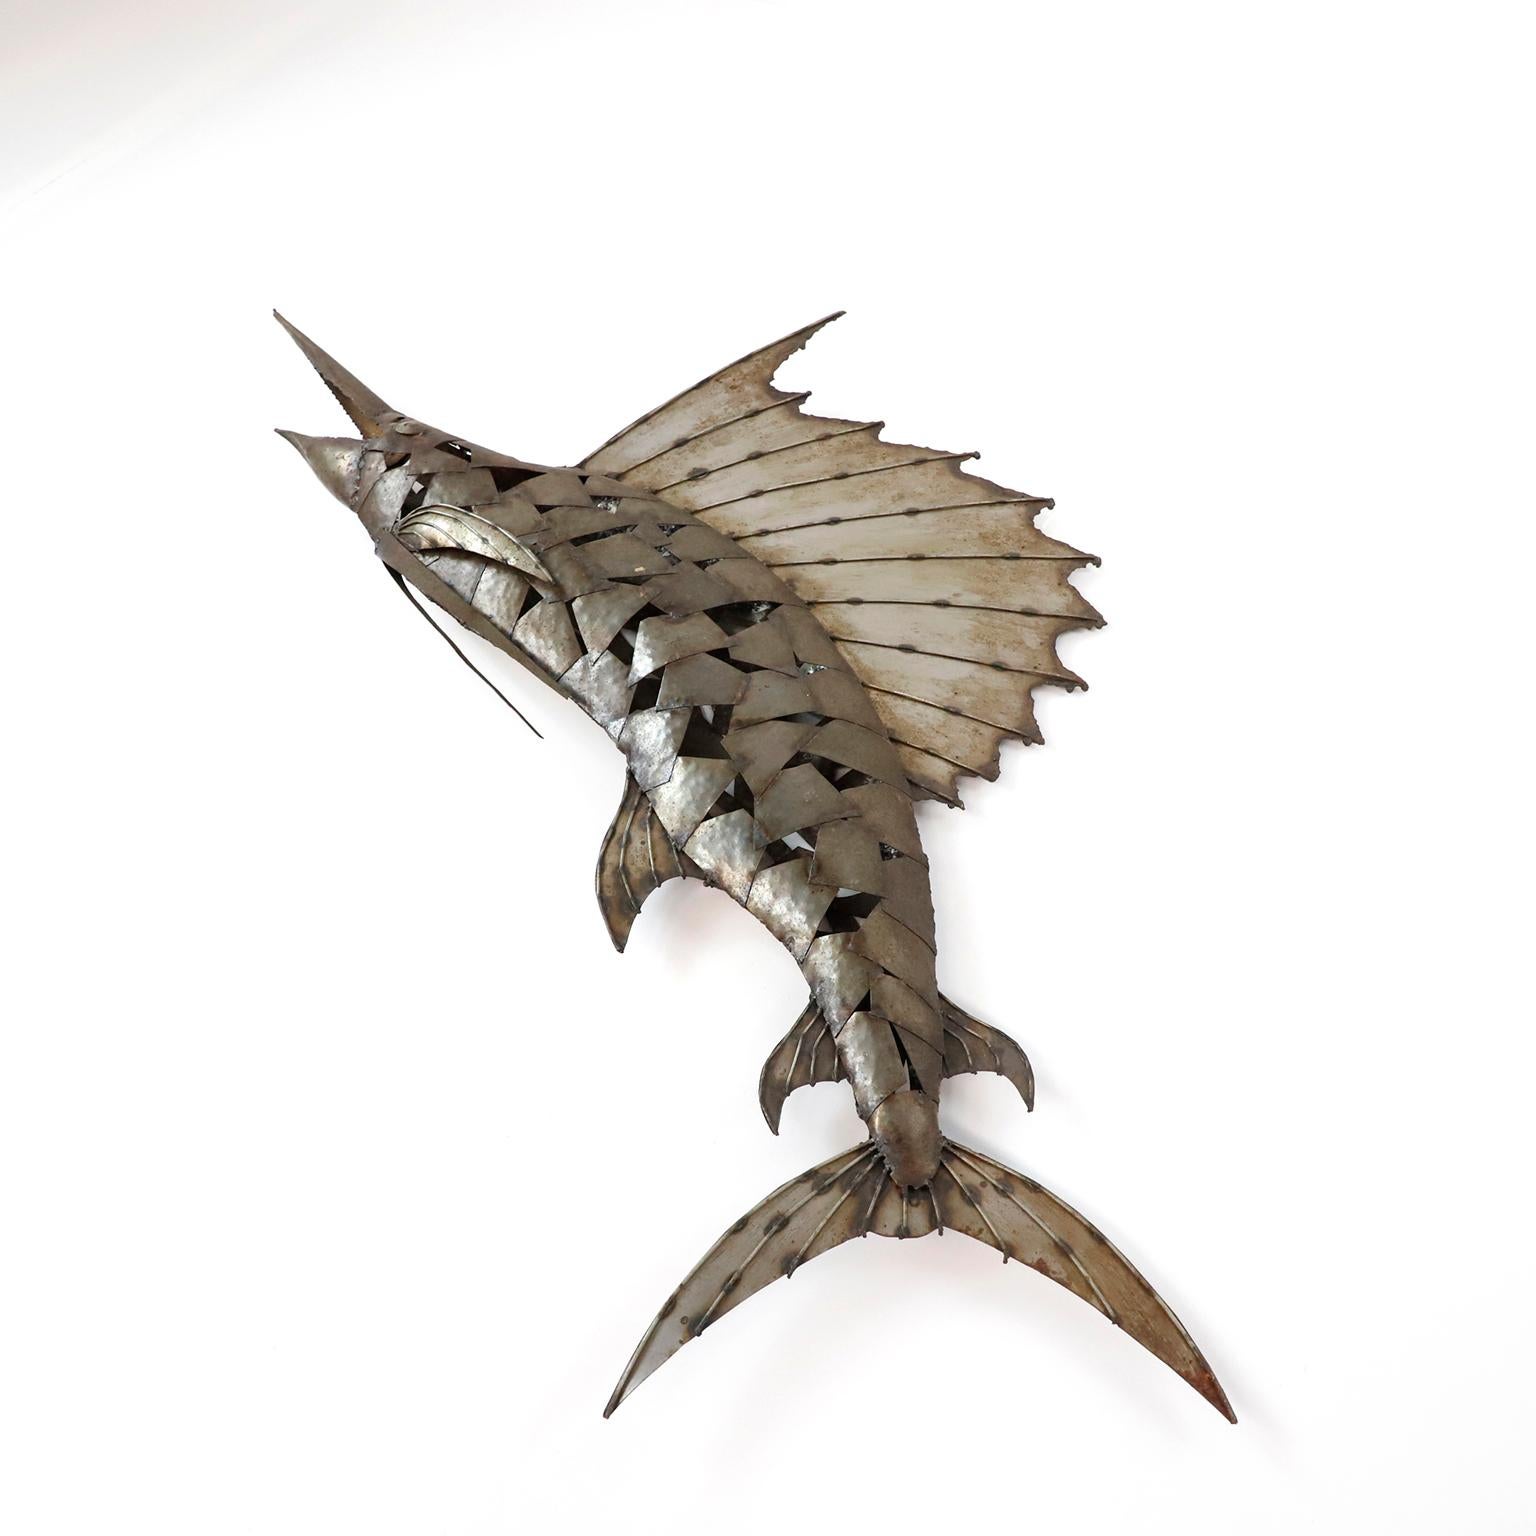 Circa 1980, we offer this Mexican Sailfish handmade in iron with fantastic patina.